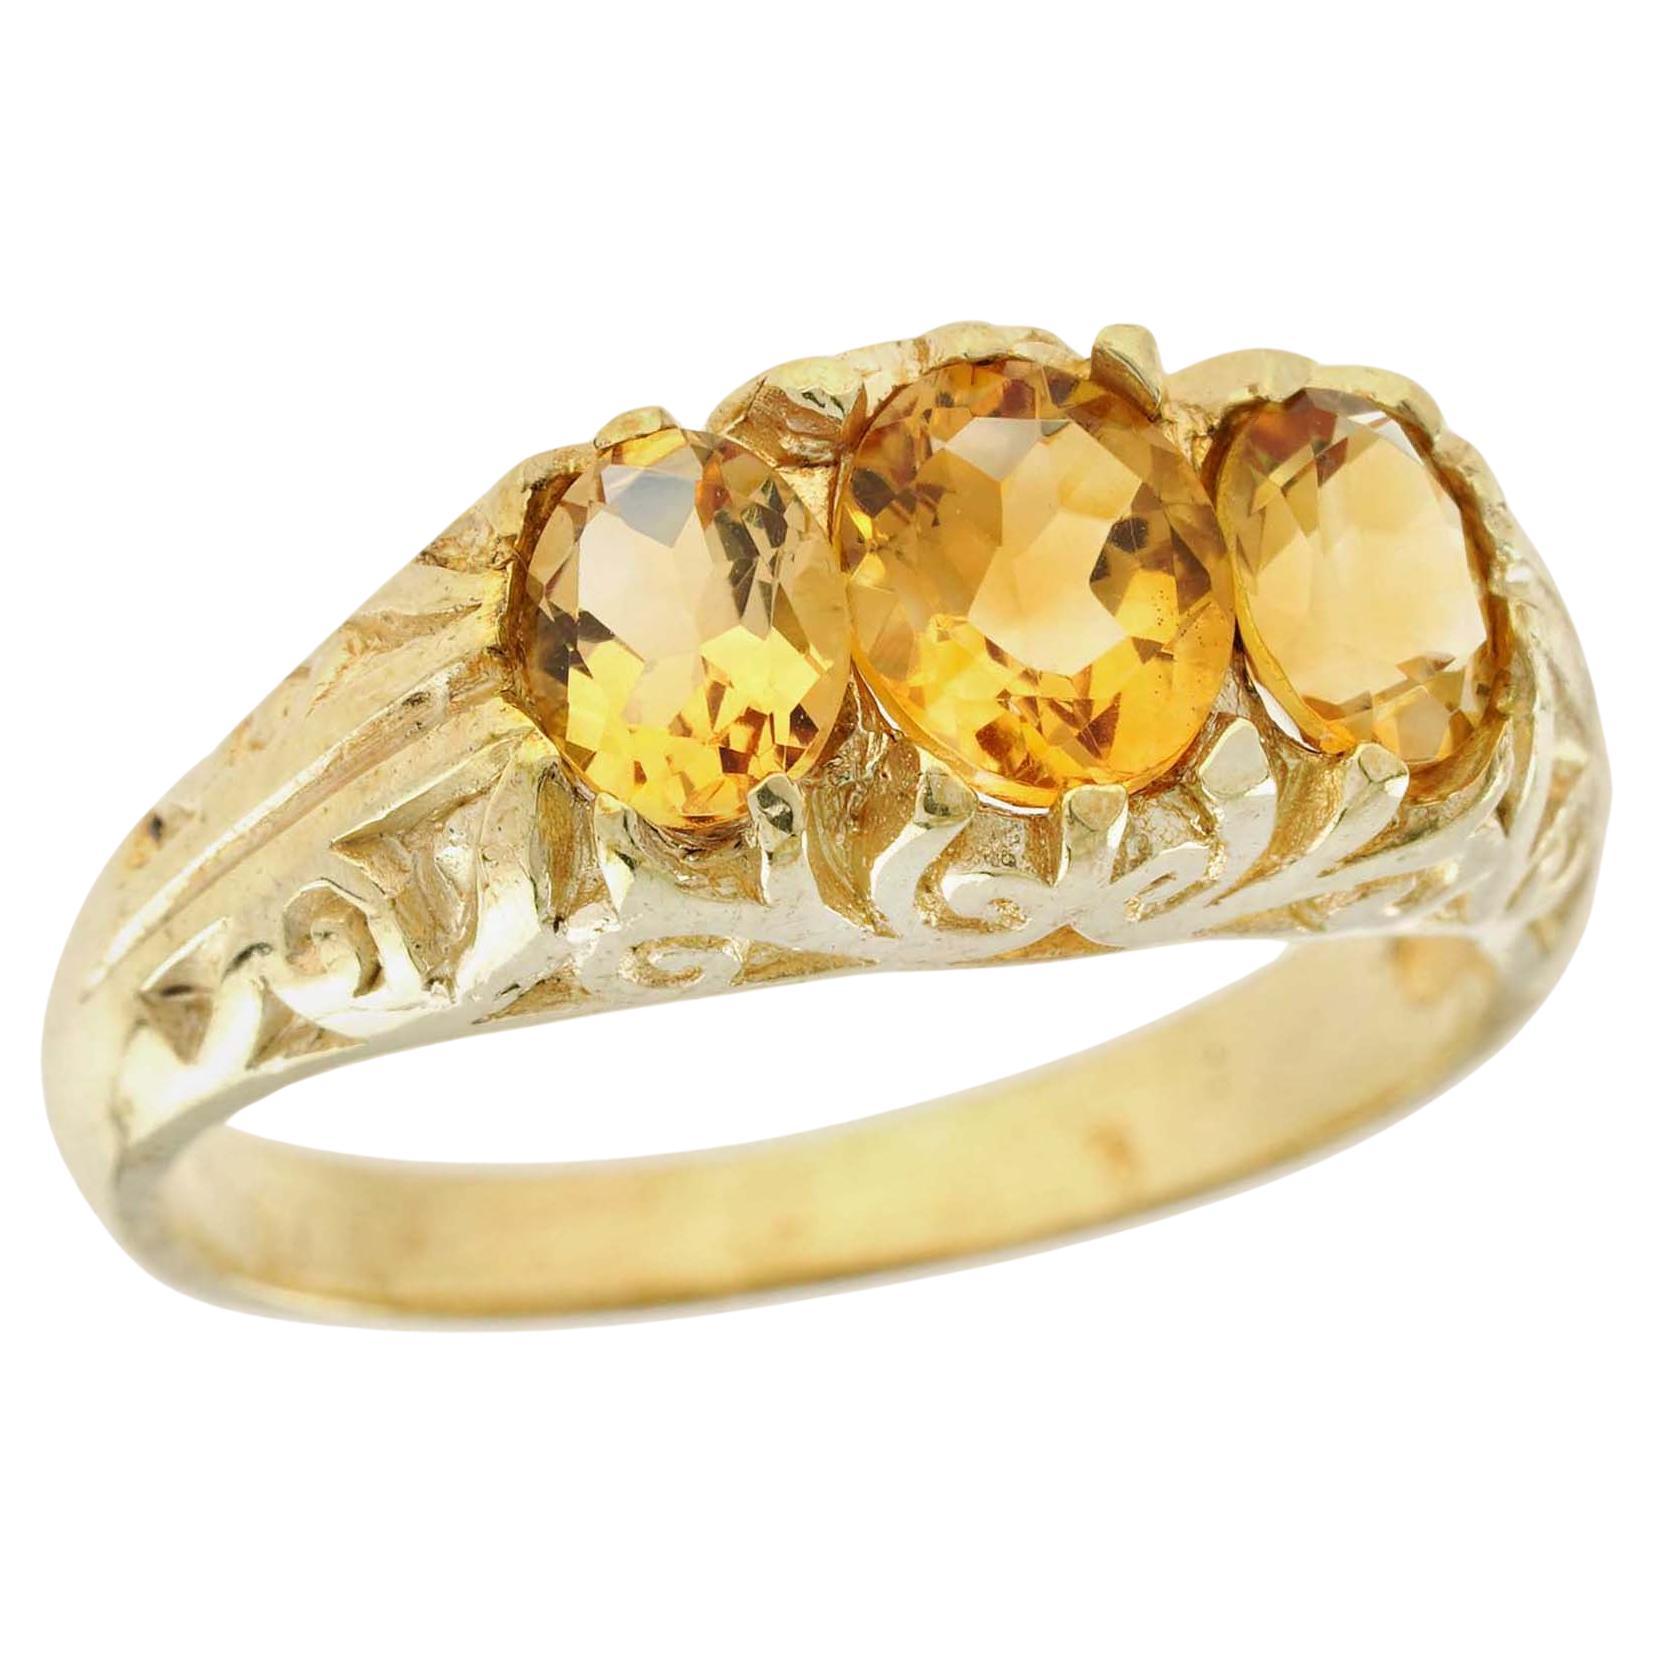 For Sale:  Natural Oval Citrine Vintage Style Three Stone Ring in Solid 9K Yellow Gold